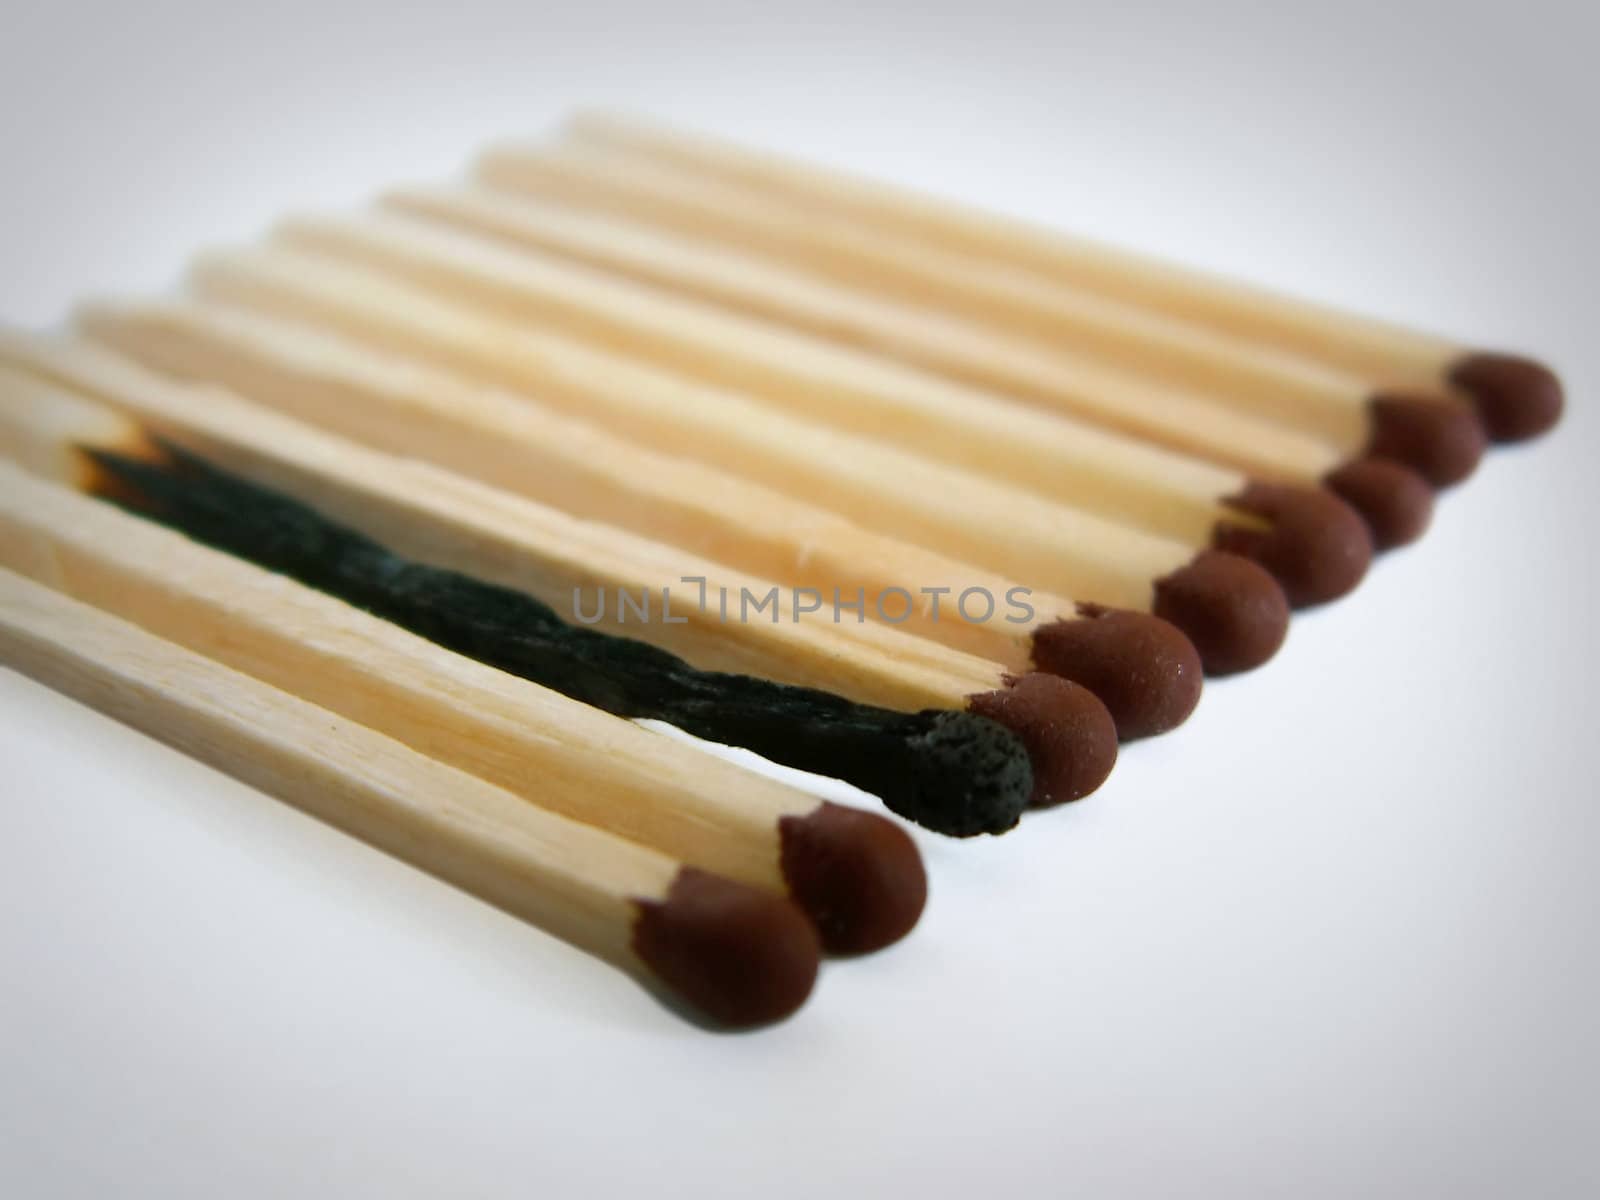 Close-up photo of several matches in a row with one burnt